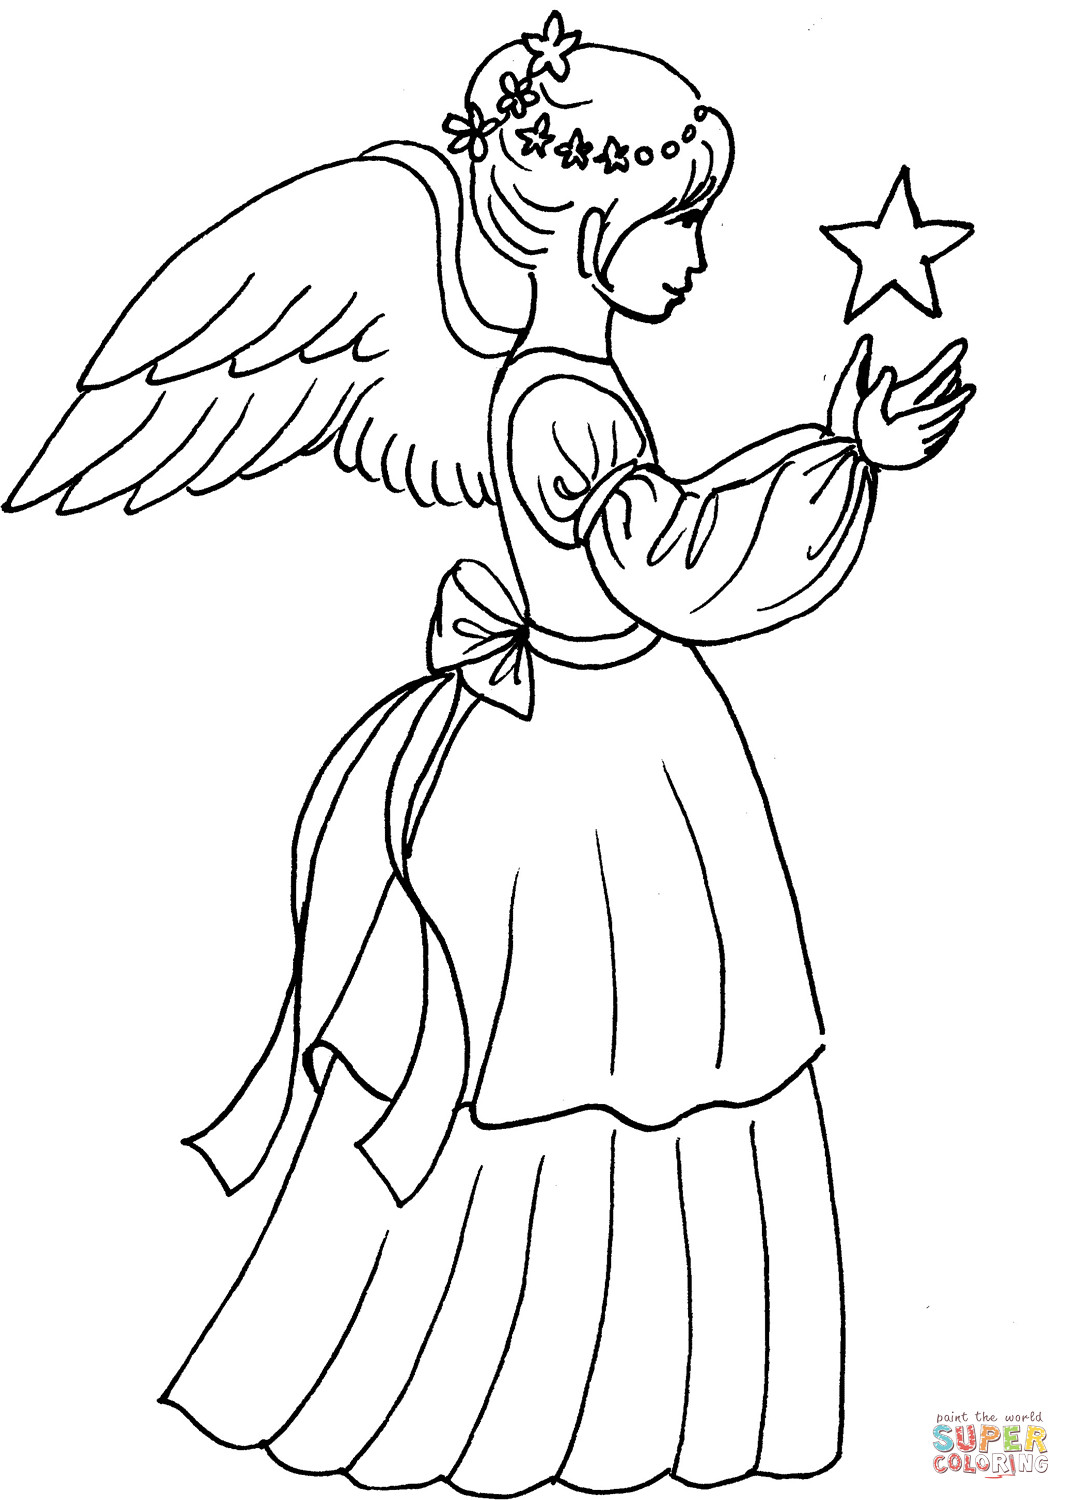 Girls Christmas Coloring Pages
 Christmas Angel Drawing at GetDrawings